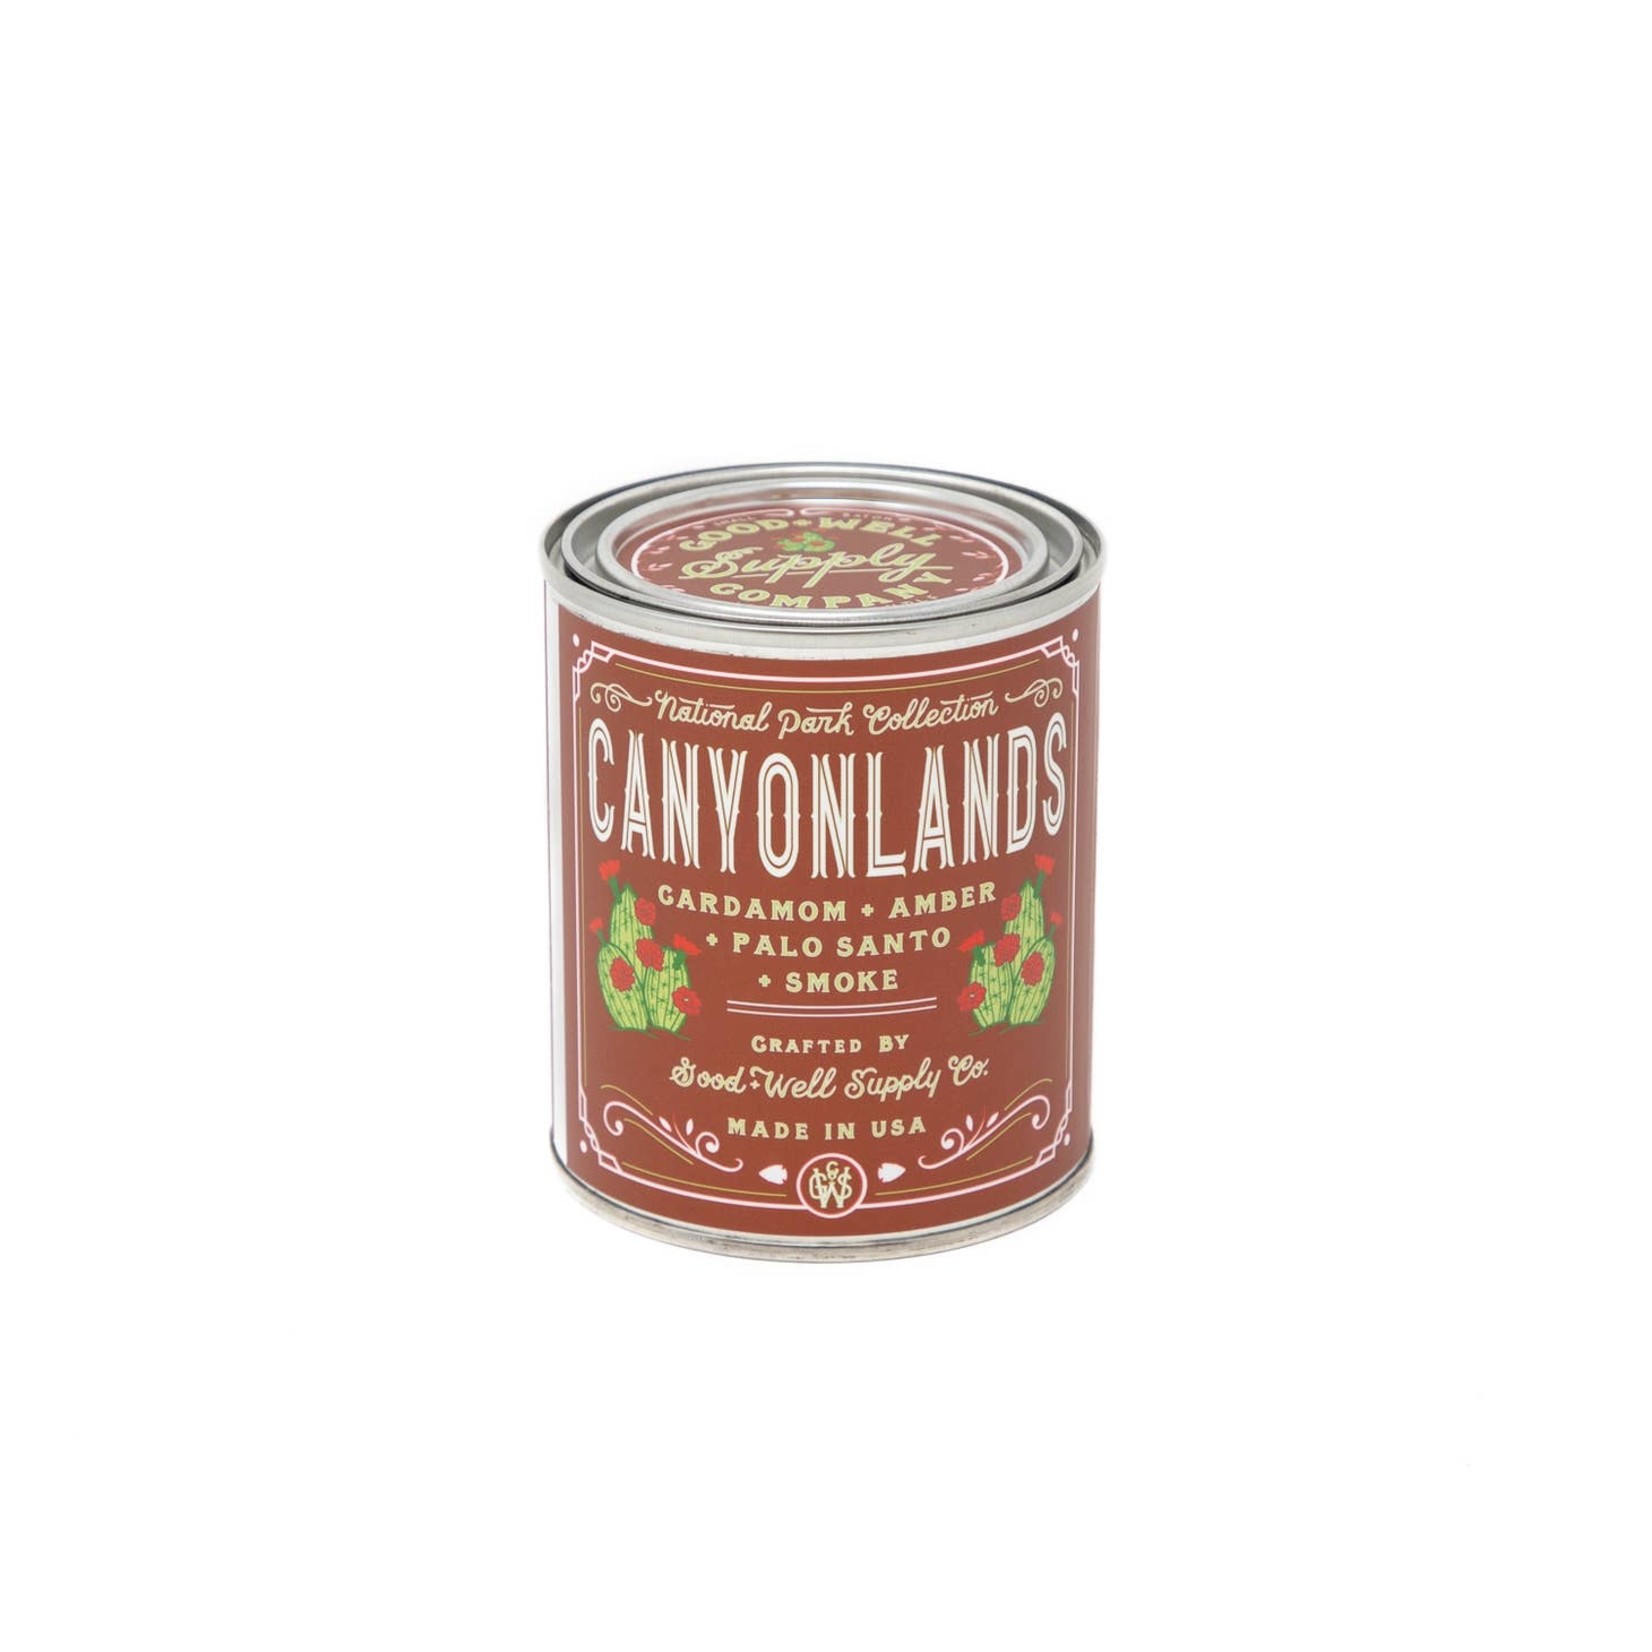 Good & Well Supply Co. Canyonlands National Park Candle 1/2 Pint